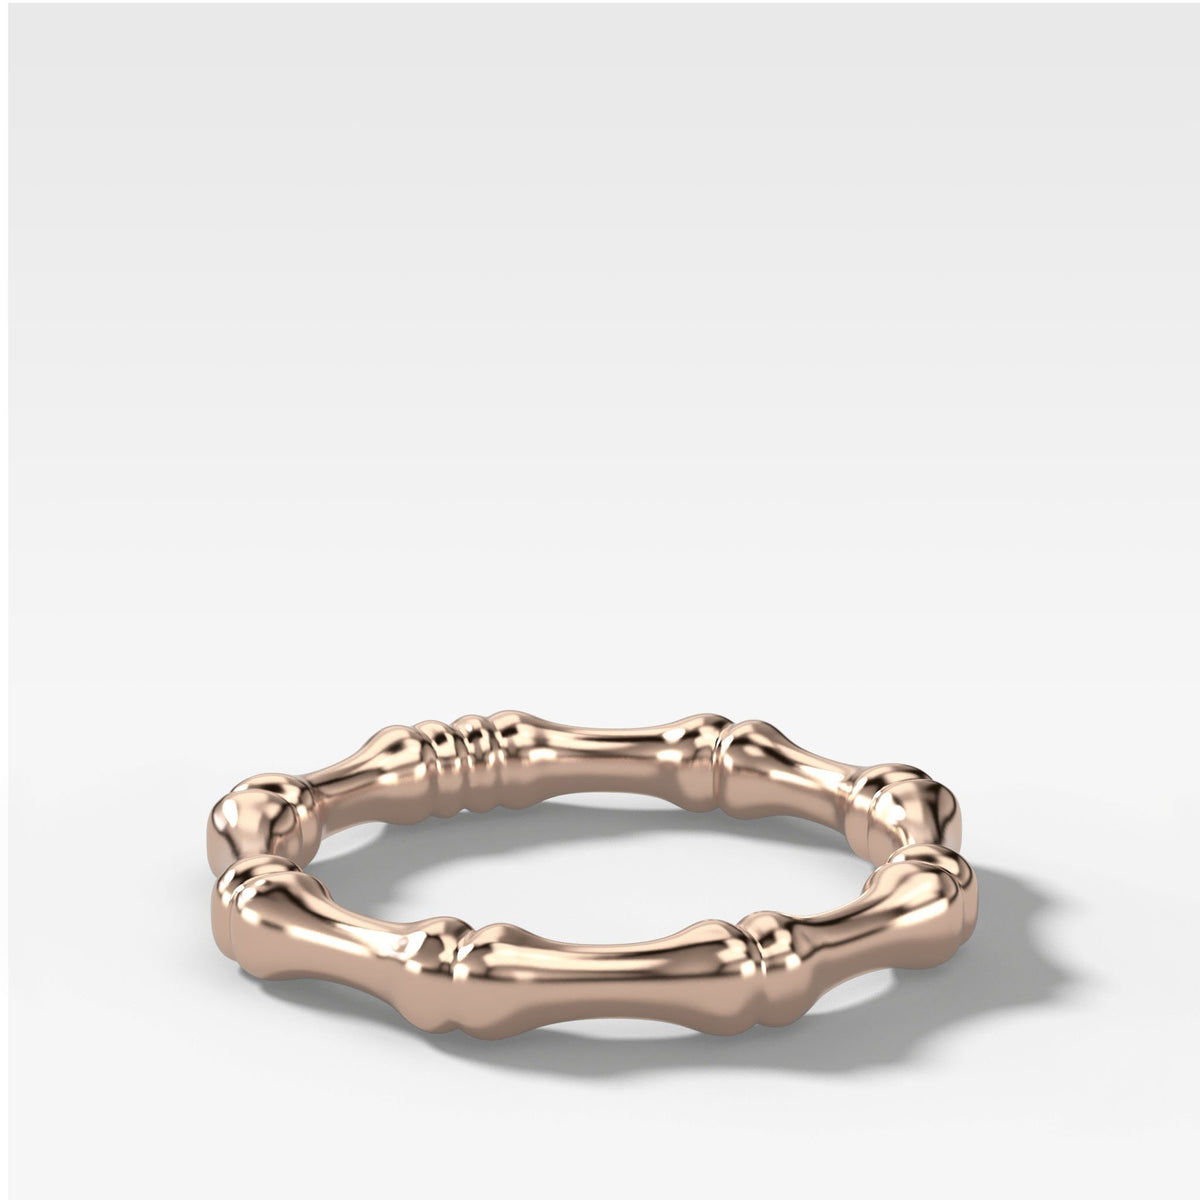 Bare Bones Stacker (3mm) Band by Good Stone in Rose Gold